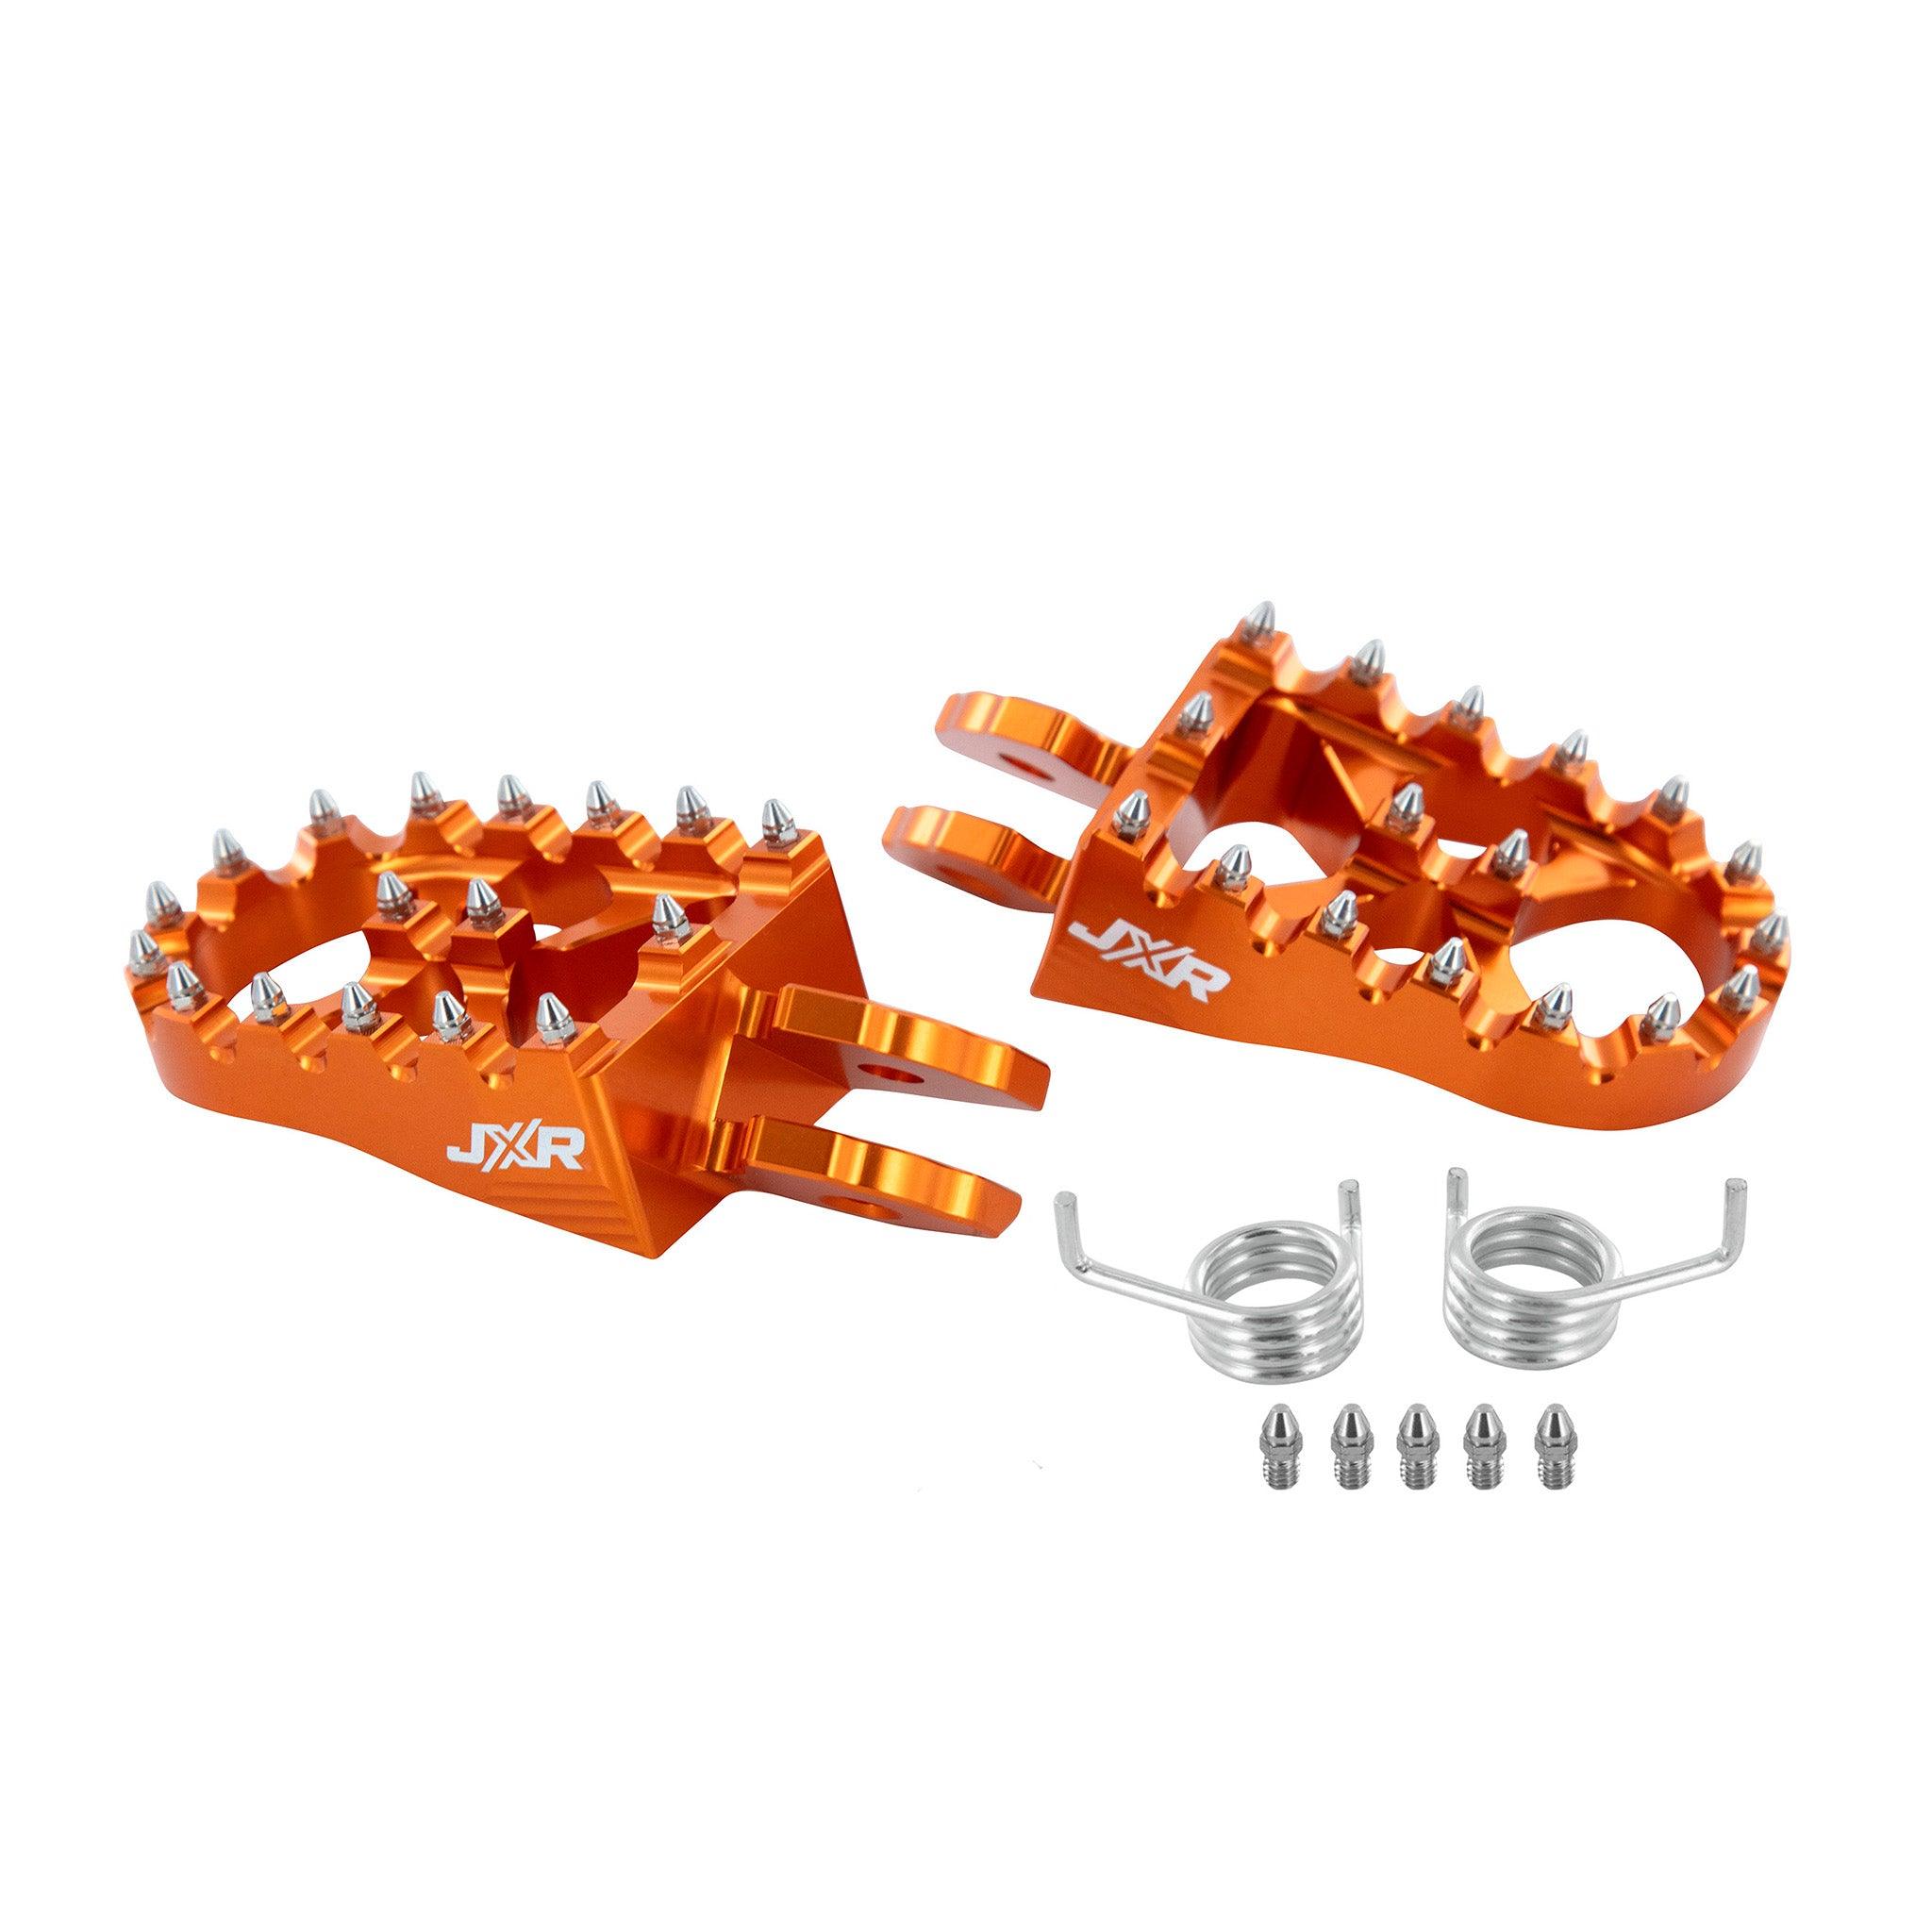 Footpegs for Surron Light Bee anodized orange